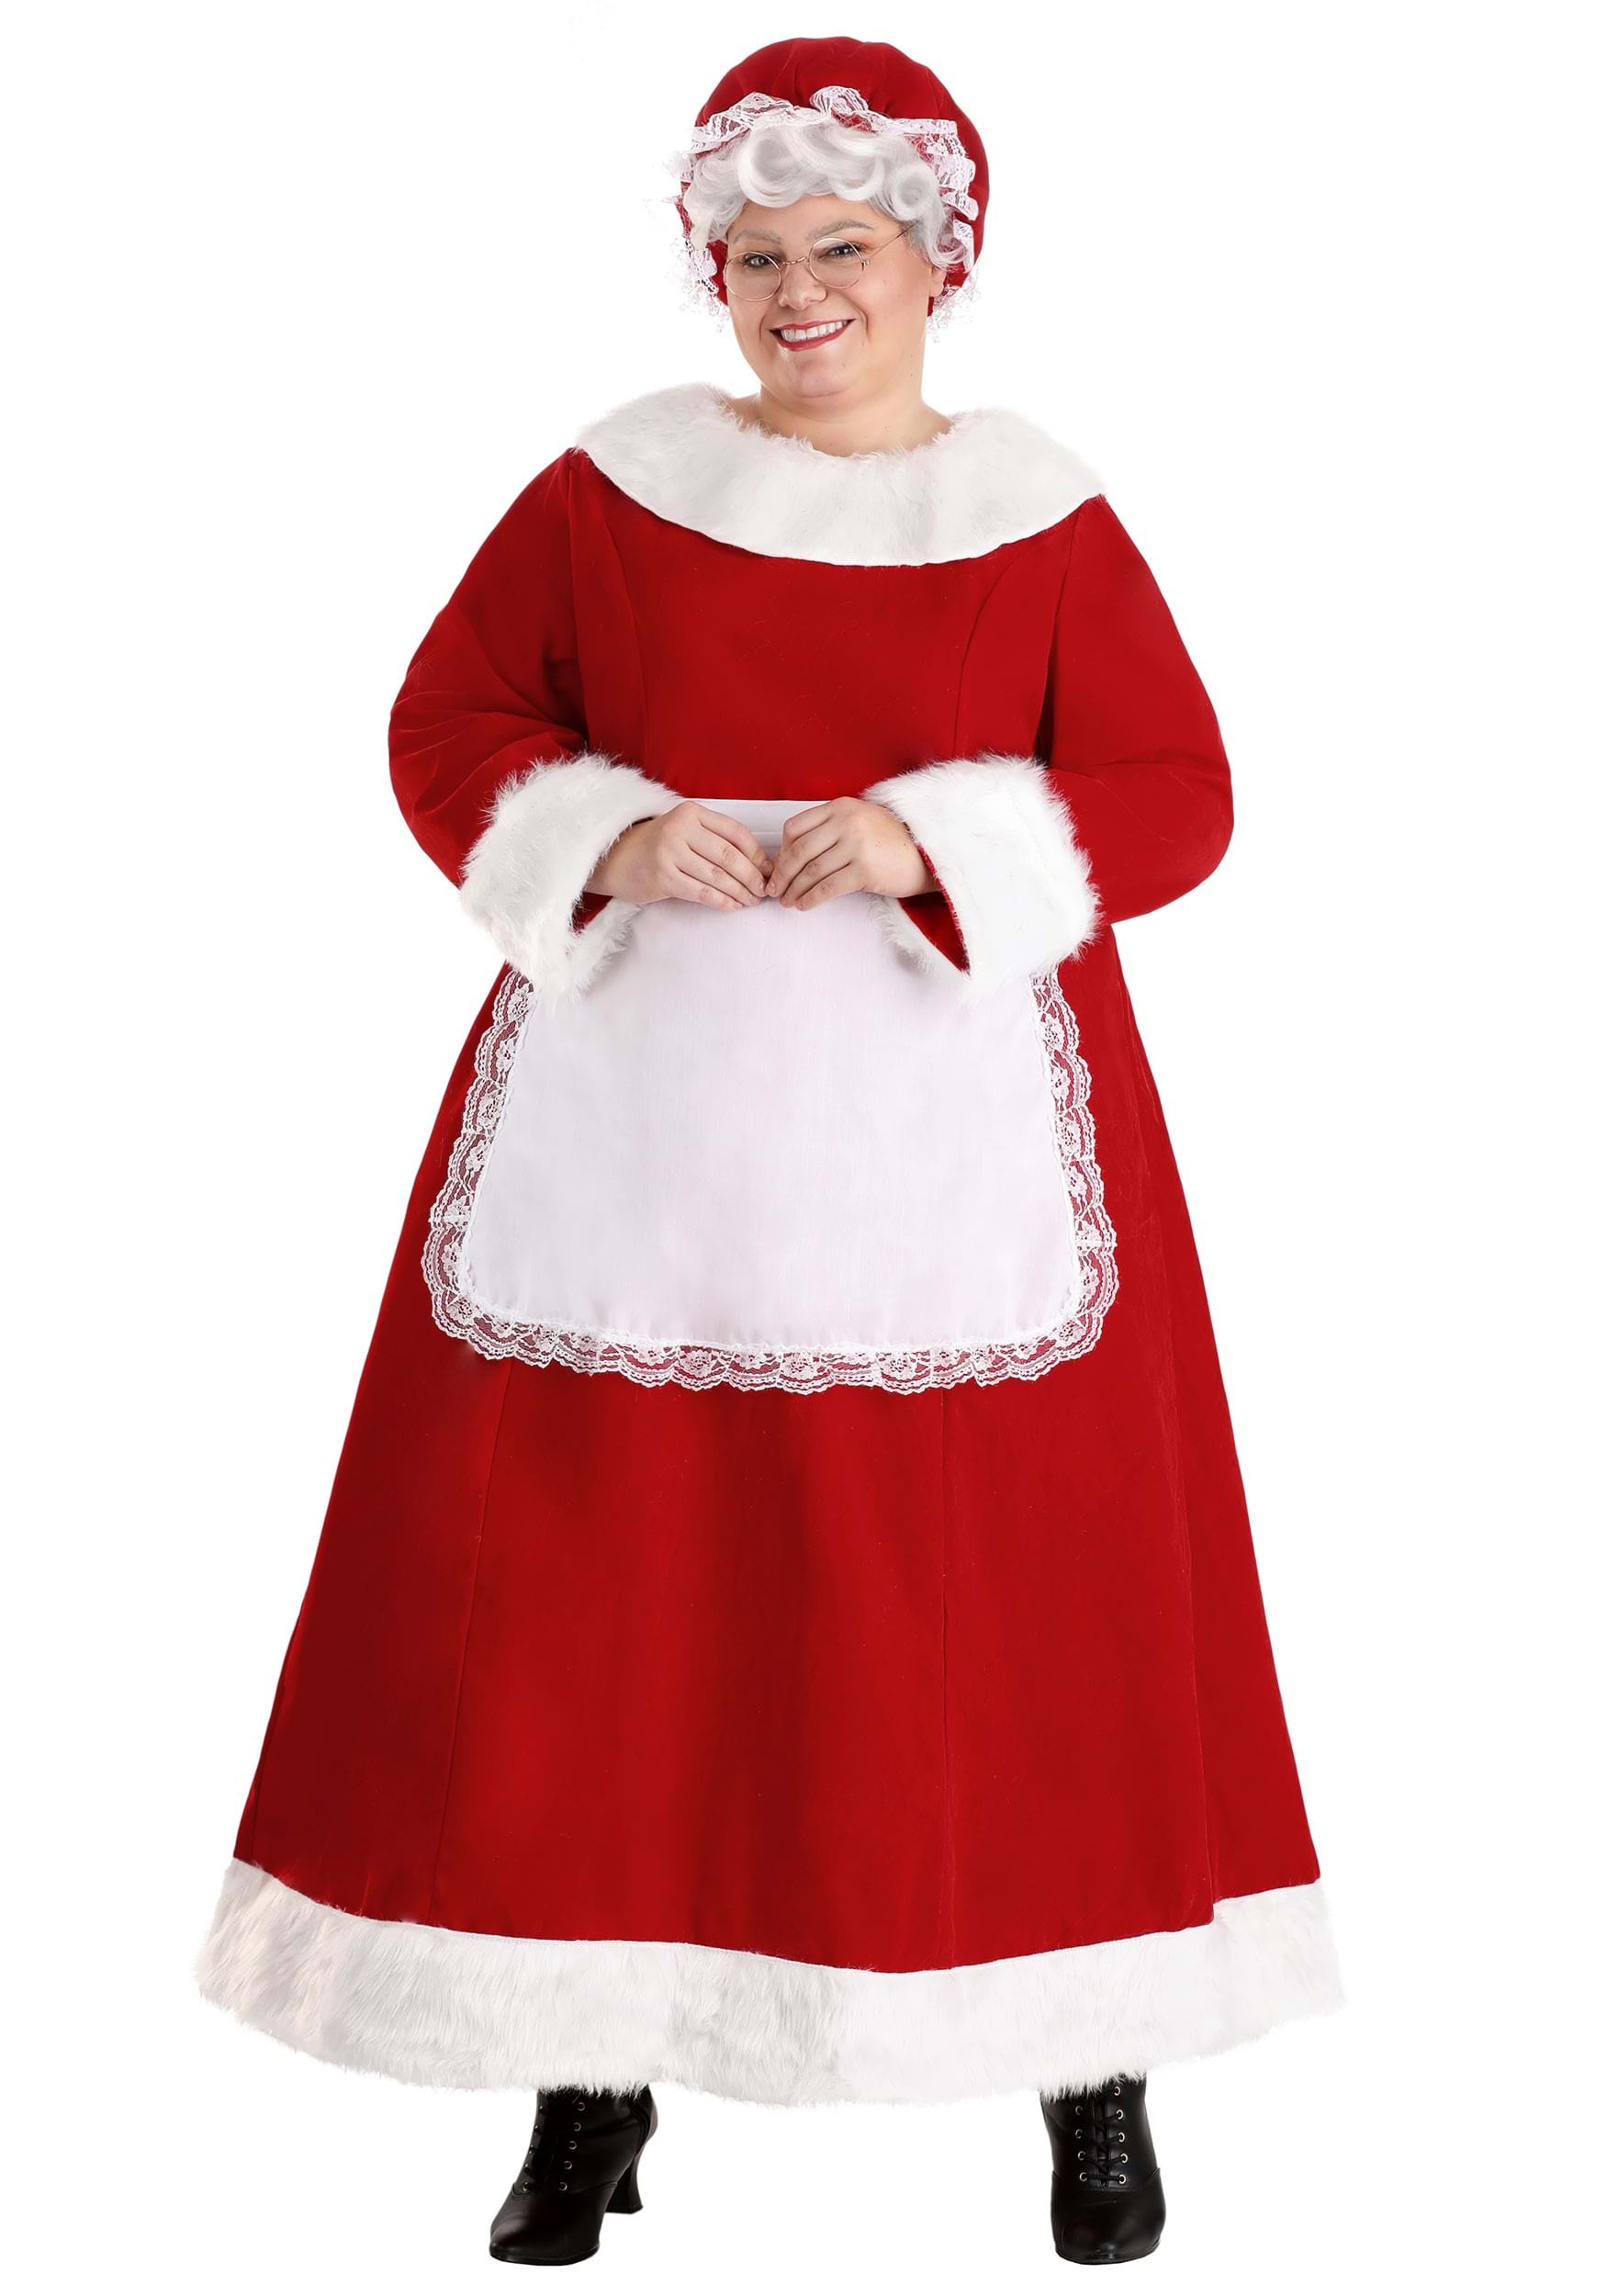 Photos - Fancy Dress Deluxe FUN Costumes Women's Plus Size  Mrs Claus Costume Red 